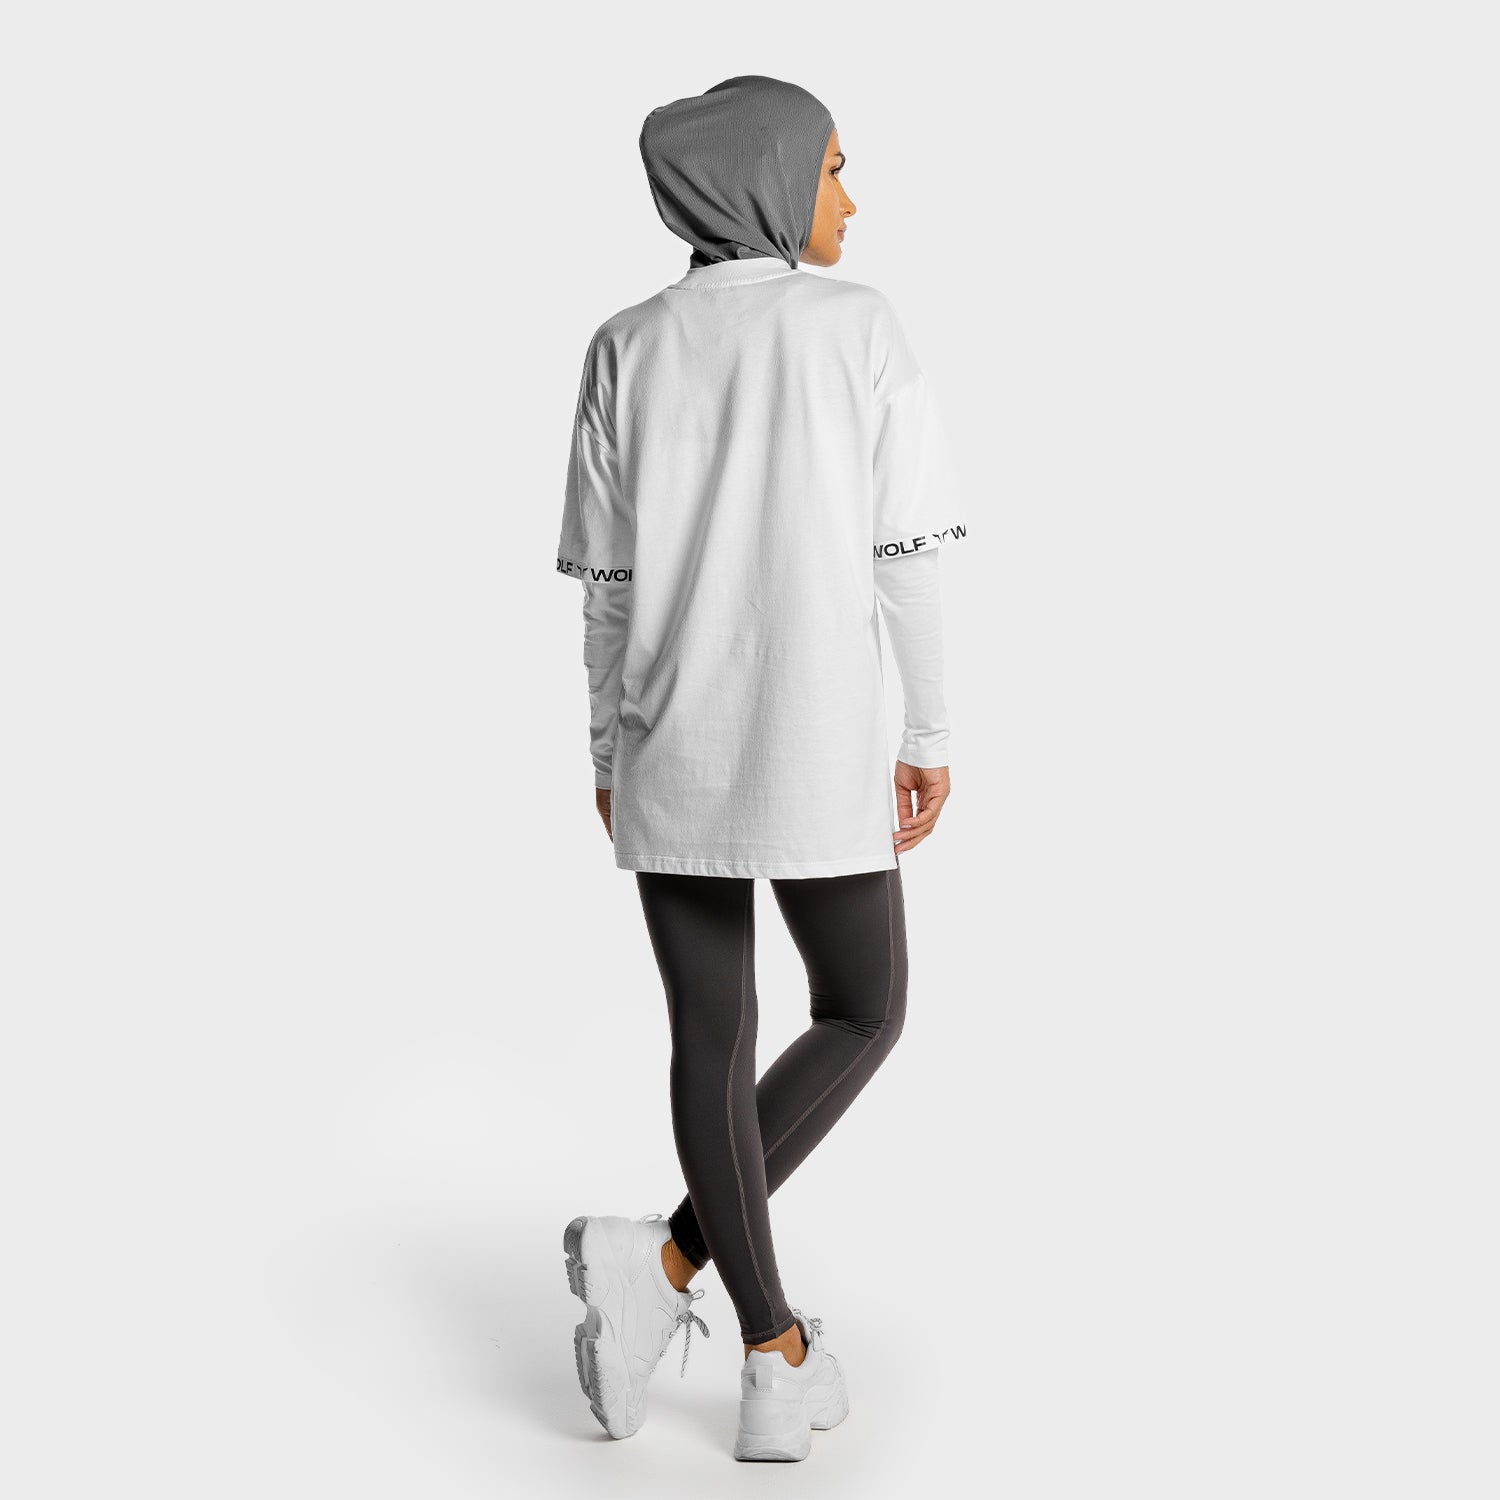 squatwolf-gym-hijab-for-women-noor-hijab-grey-workout-clothes